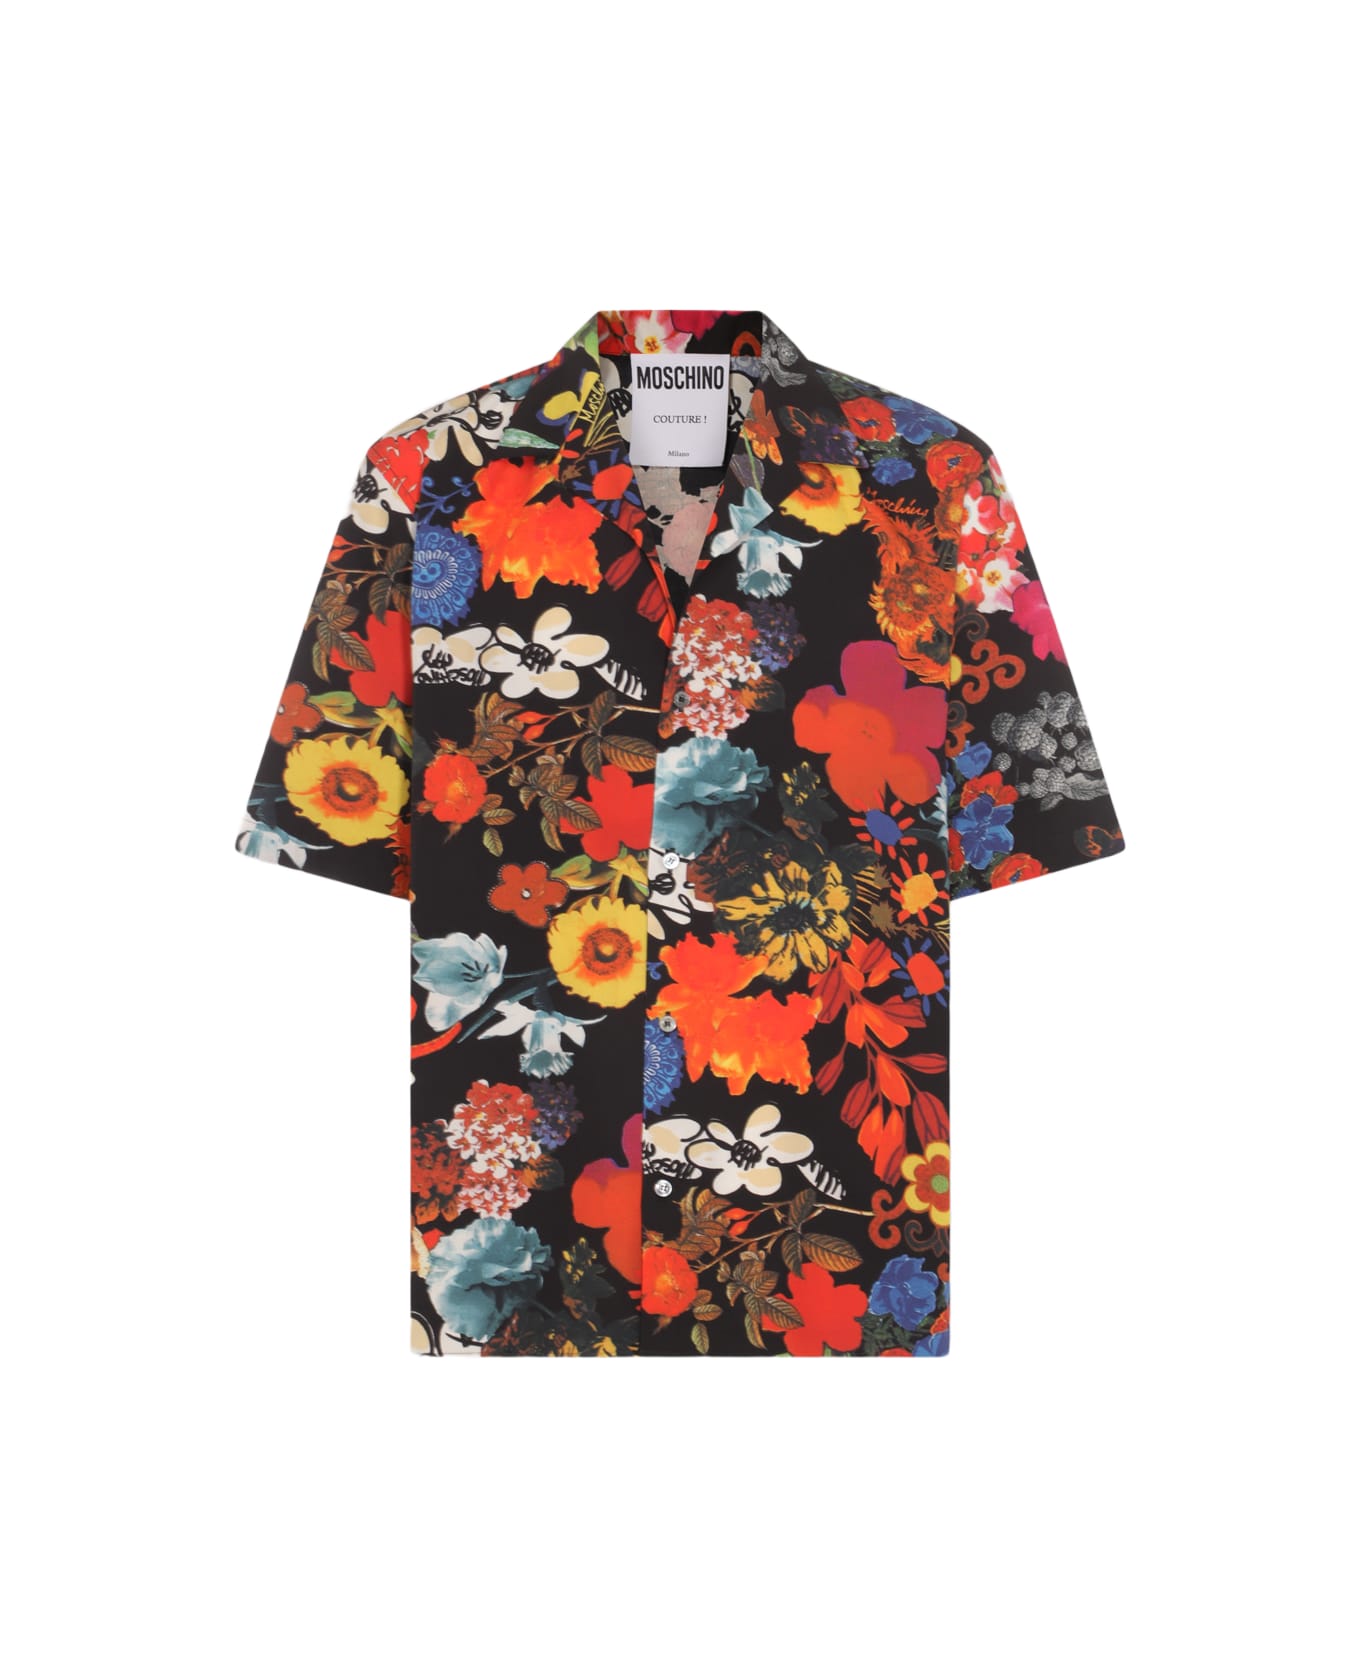 Moschino Multicolor Cotton Shirt - Red